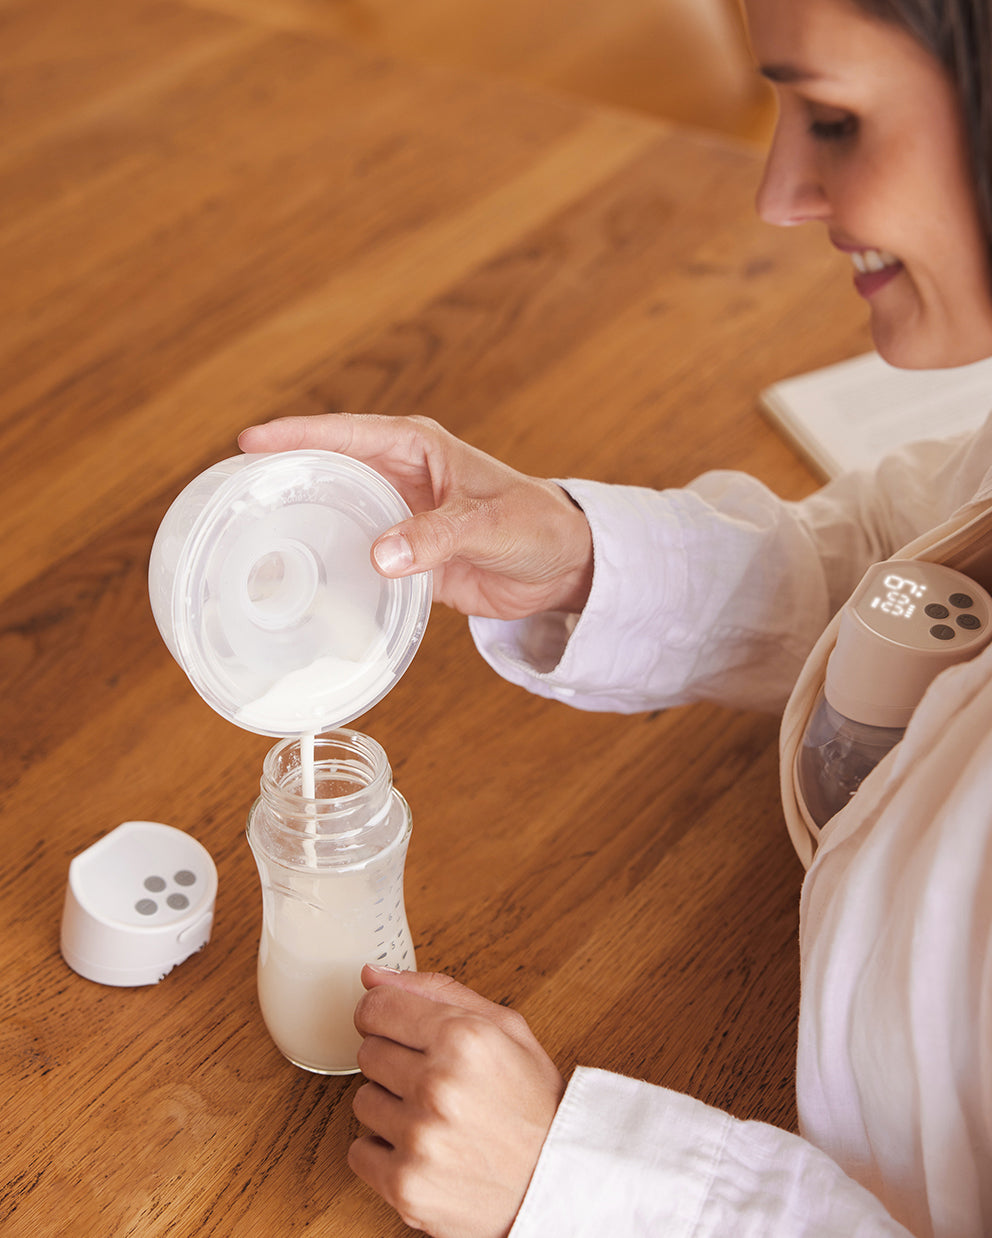 S12 Pro Wearable Breast Pump for Pumping